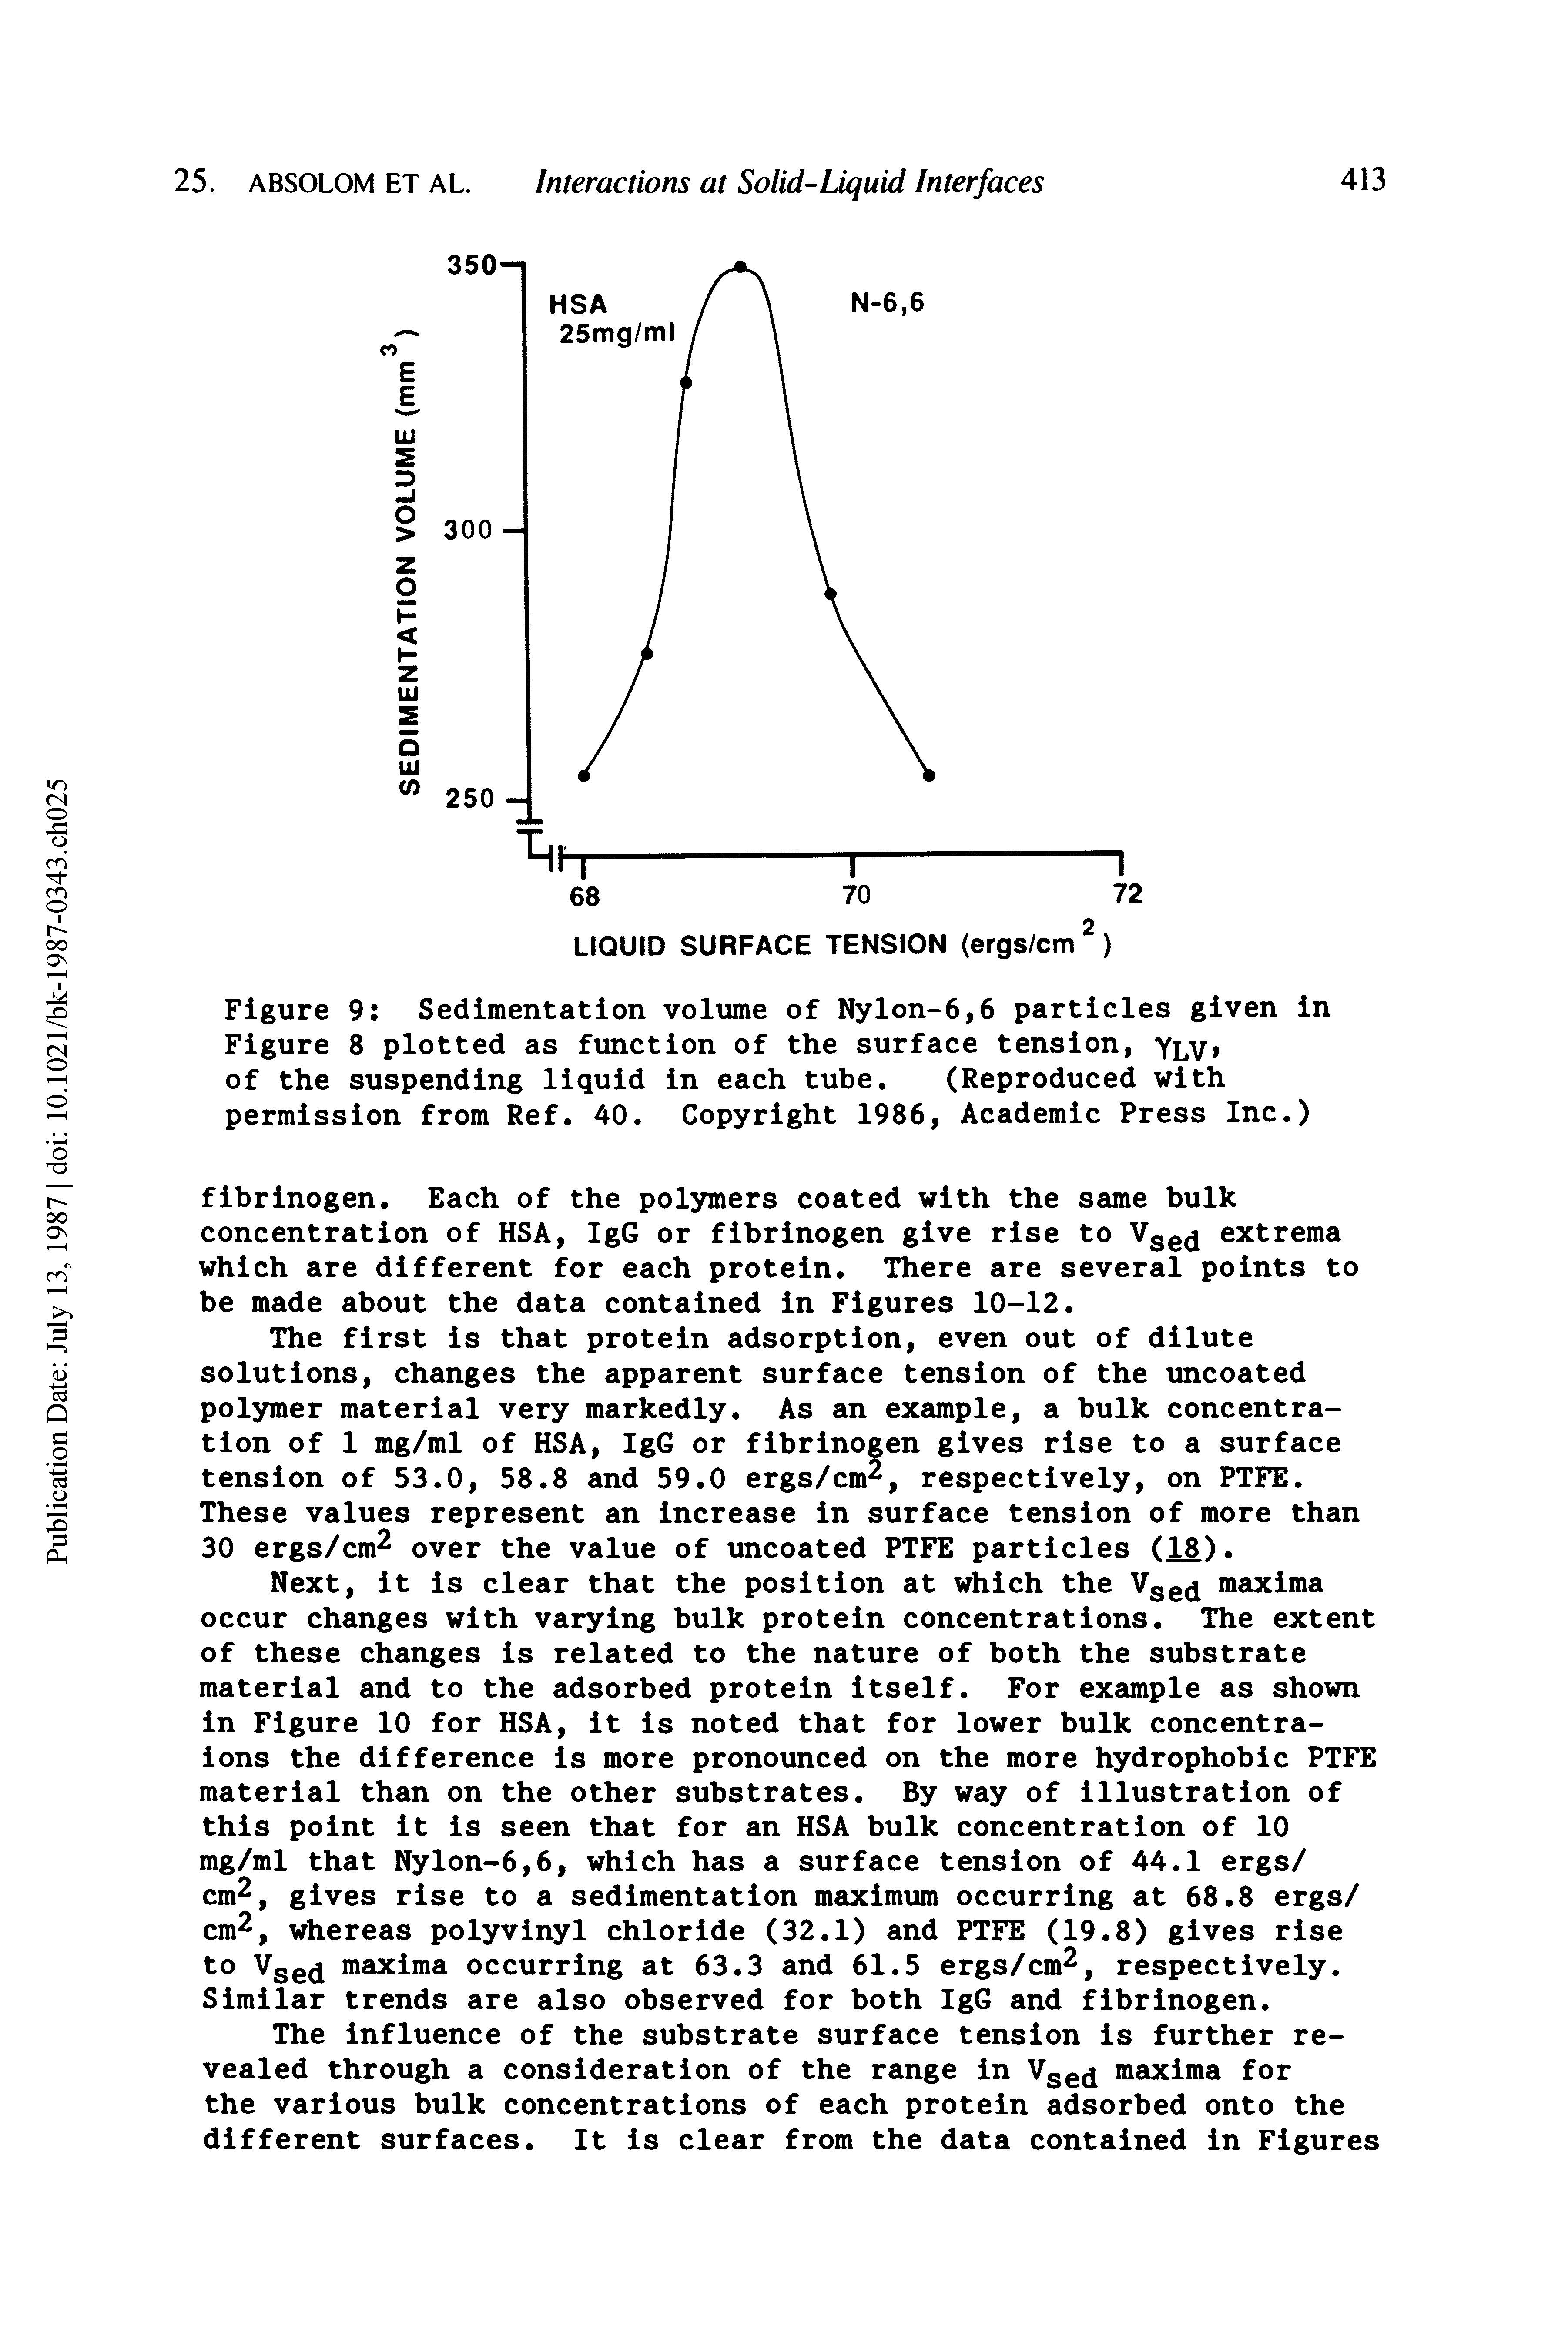 Figure 9 Sedimentation volume of Nylon-6,6 particles given in Figure 8 plotted as fiinction of the surface tension, YlV of the suspending liquid in each tube. (Reproduced with permission from Ref. 40. Copyright 1986, Academic Press Inc.)...